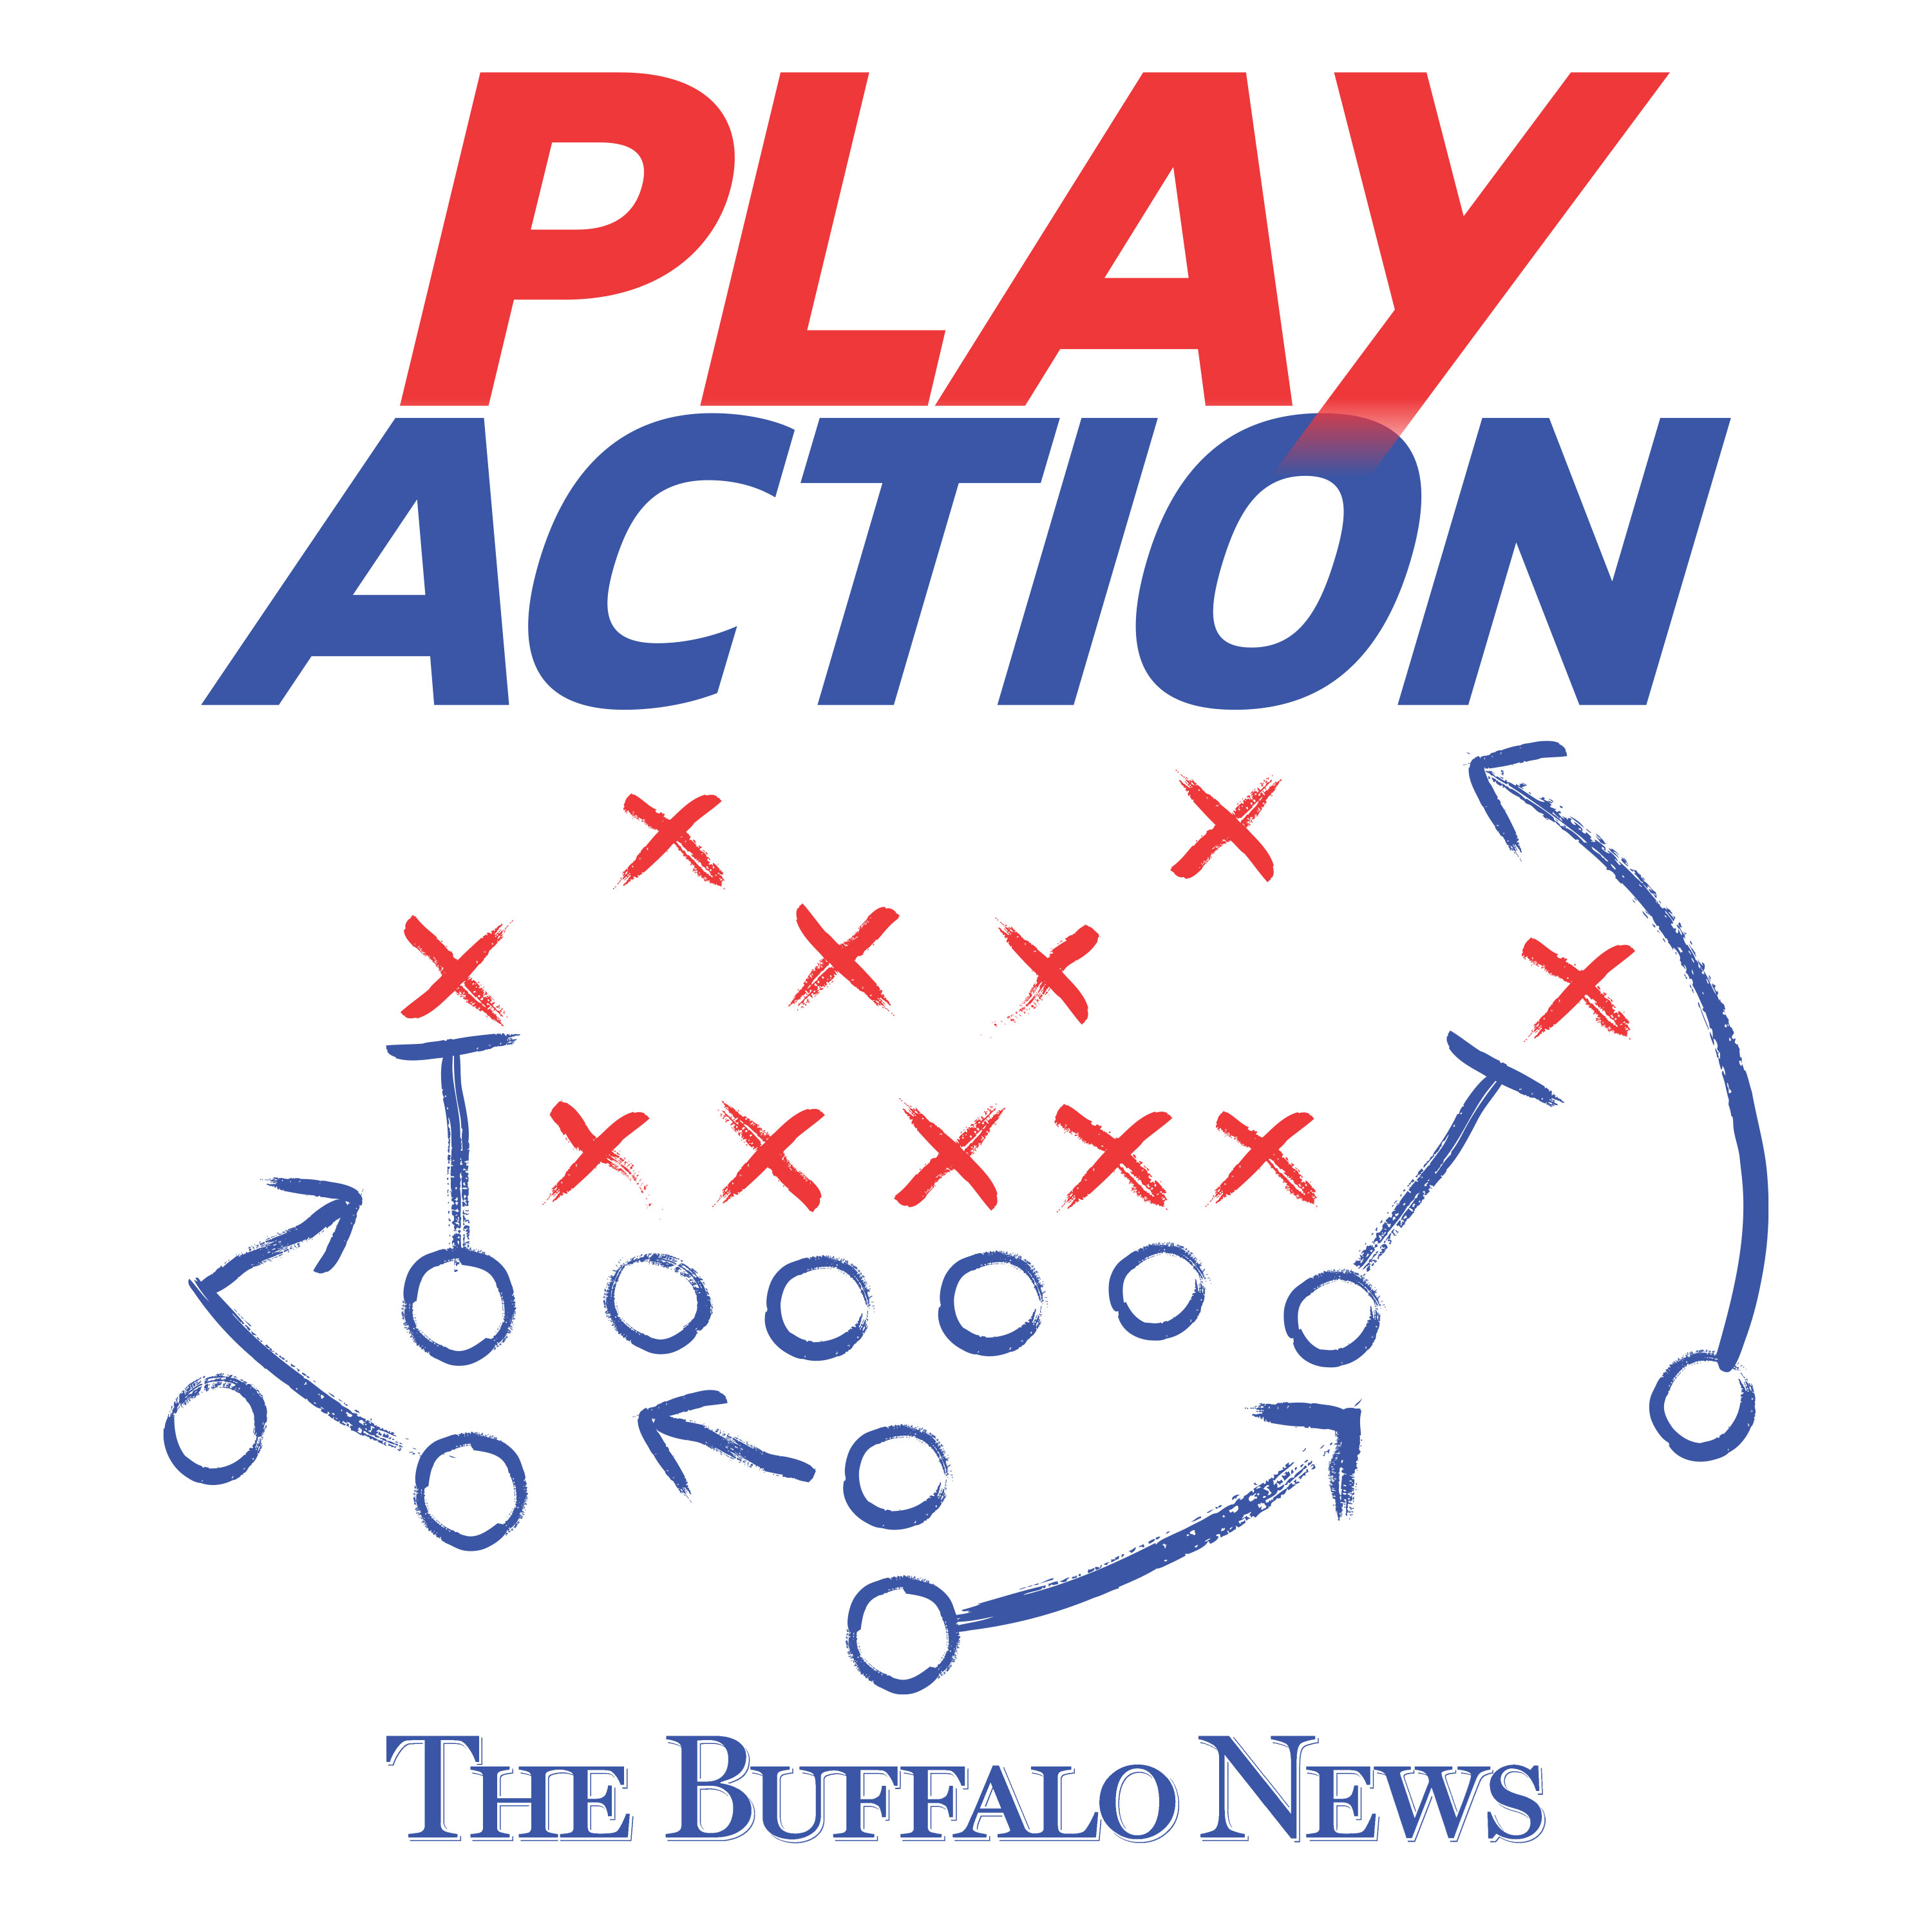 With Josh Allen at his best the Bills look to beat the Chiefs in Buffalo